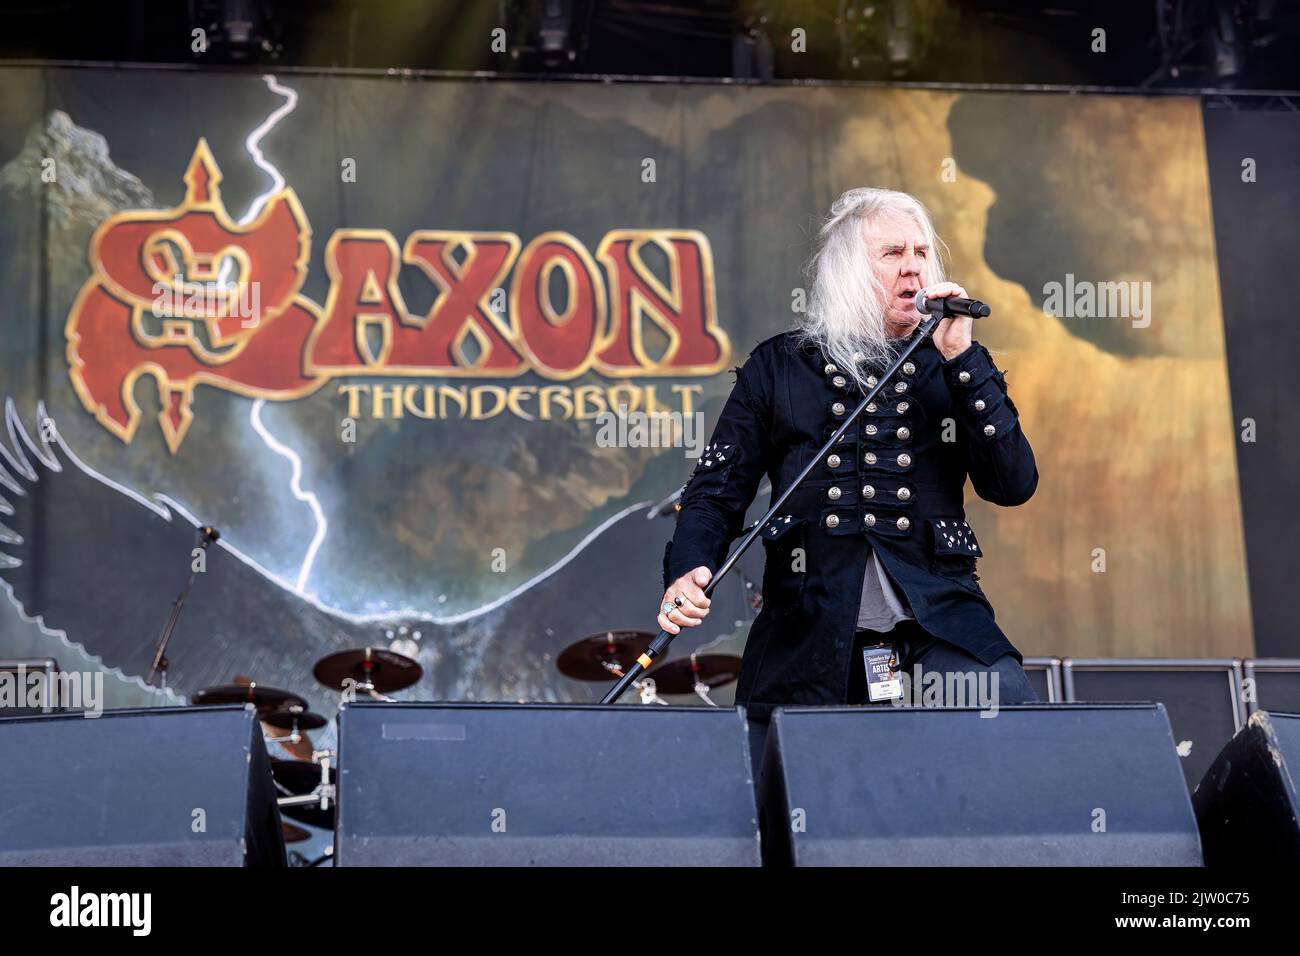 Solvesborg, Sweden. 10th, June 2022. The British heavy metal band Saxon performs a live concert during the Swedish music festival Sweden Rock Festival 2022 in Solvesborg. Here vocalist Biff Byford is seen live on stage. (Photo credit: Gonzales Photo - Terje Dokken). Stock Photo